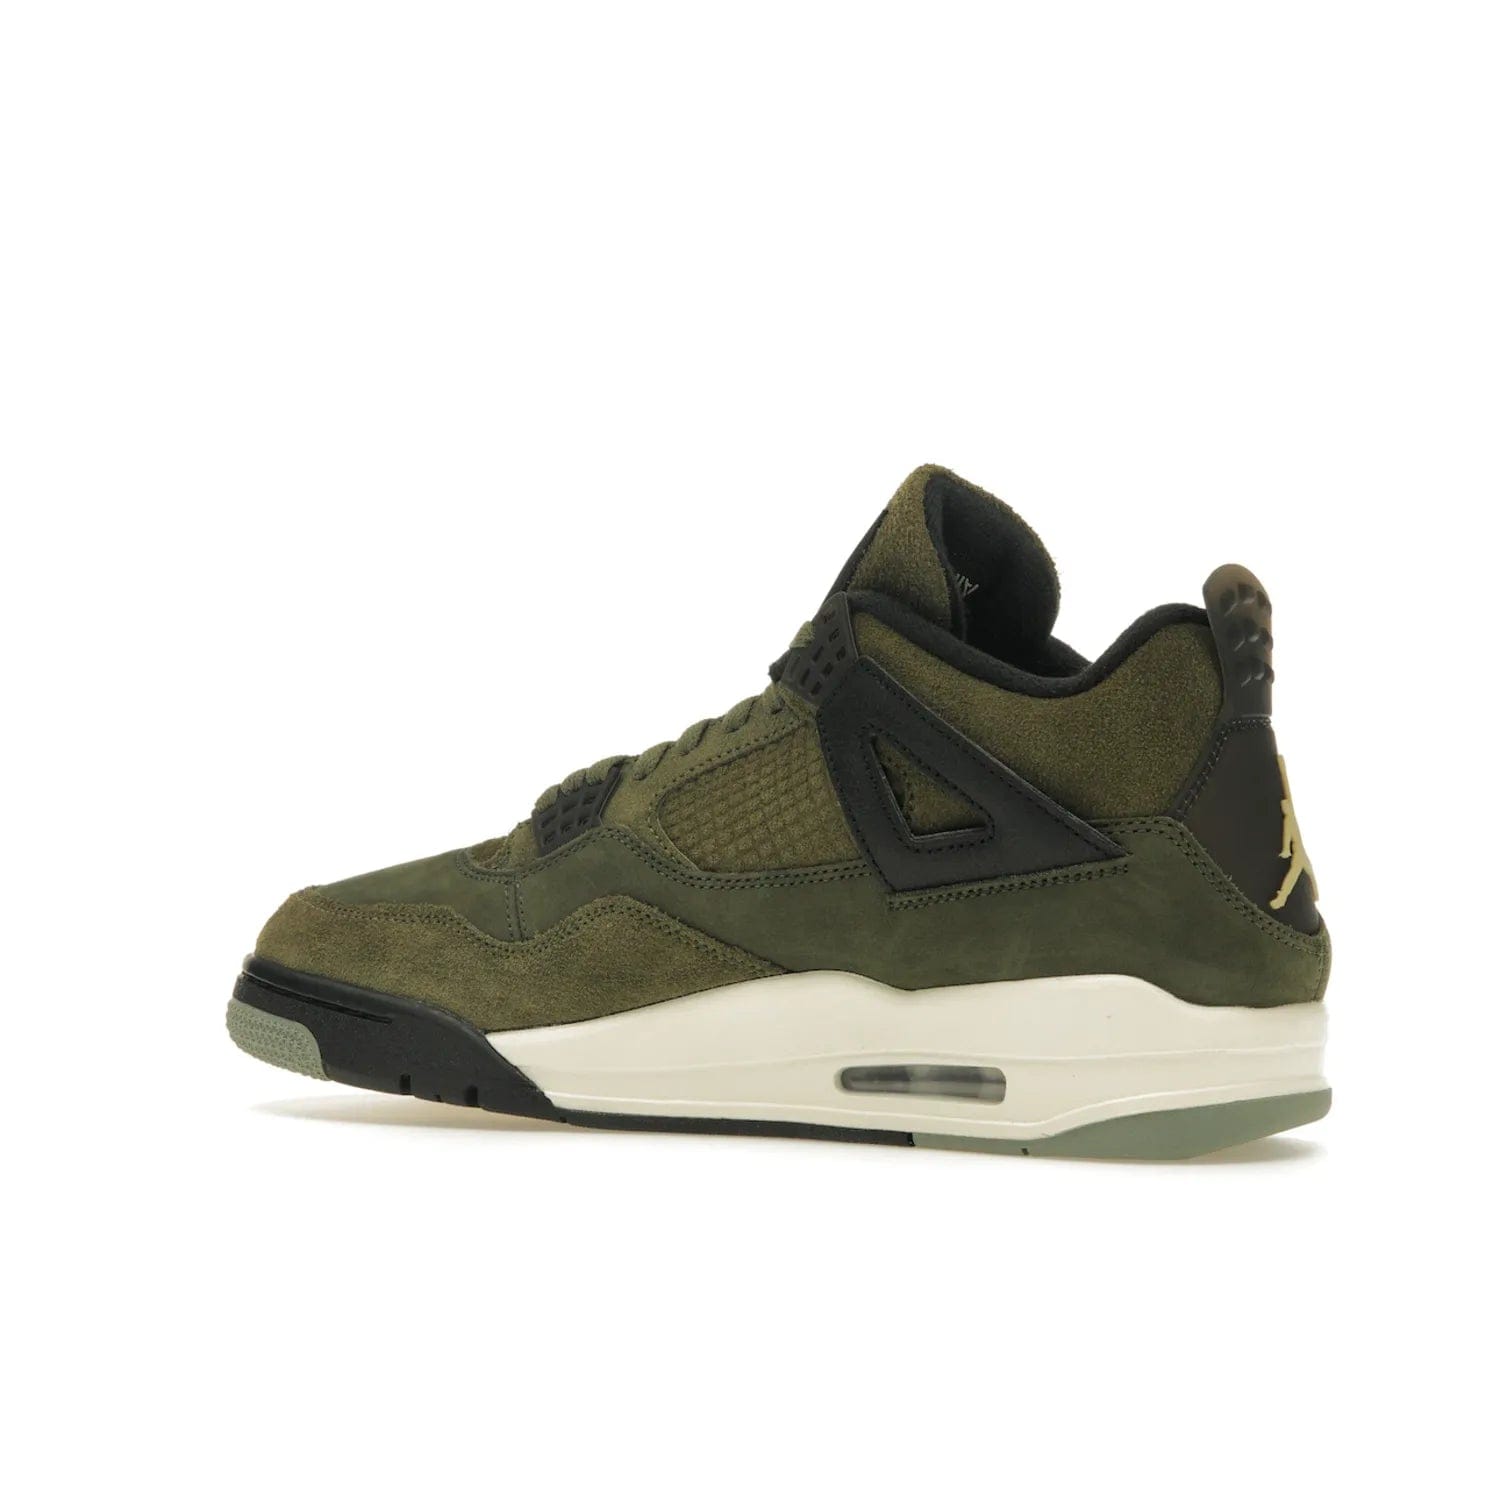 Jordan 4 Retro SE Craft Medium Olive - Image 22 - Only at www.BallersClubKickz.com - Grab the Jordan 4 Retro SE Crafts for a unique style. Combines Medium Olive, Pale Vanilla, Khaki, Black and Sail, with same classic shape, cushioning, and rubber outsole. Available on November 18th!